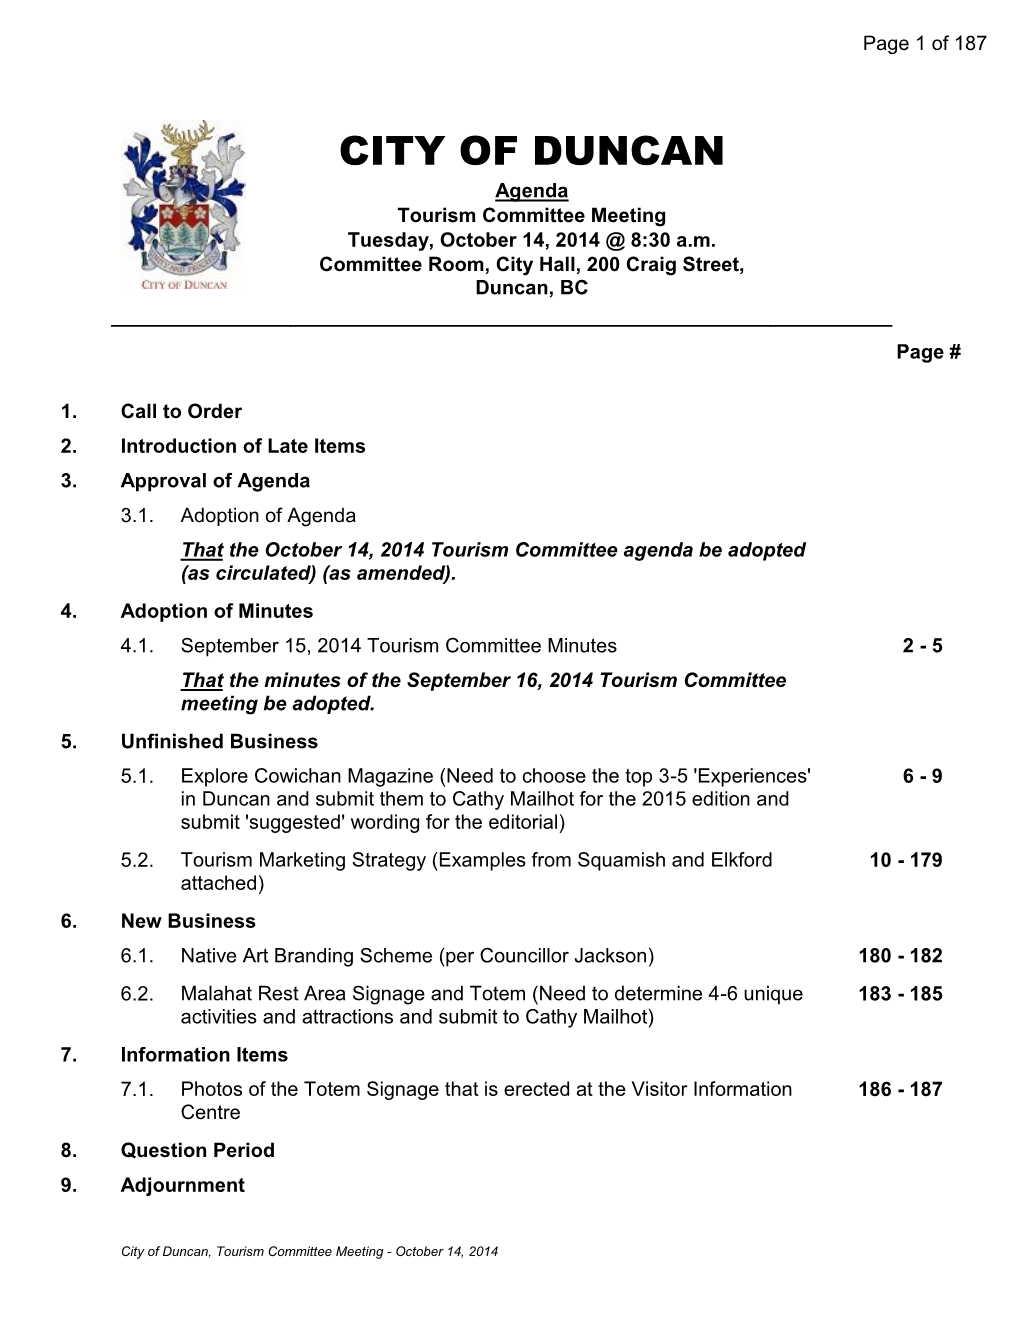 CITY of DUNCAN Agenda Tourism Committee Meeting Tuesday, October 14, 2014 @ 8:30 A.M